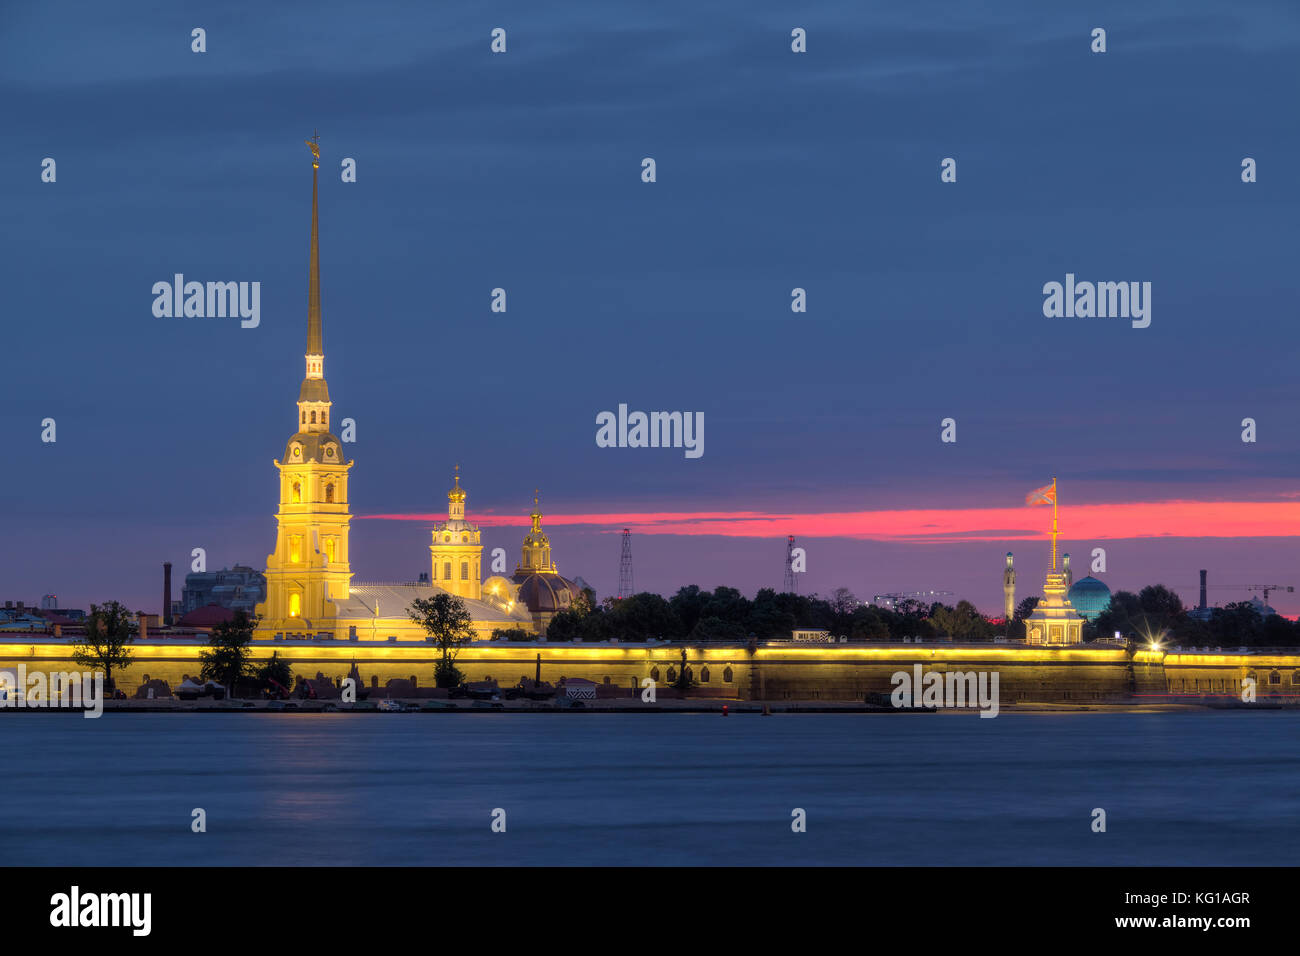 Night view on the illuminated Peter and Paul Fortress and Neva River, St. Petersburg, Russia Stock Photo